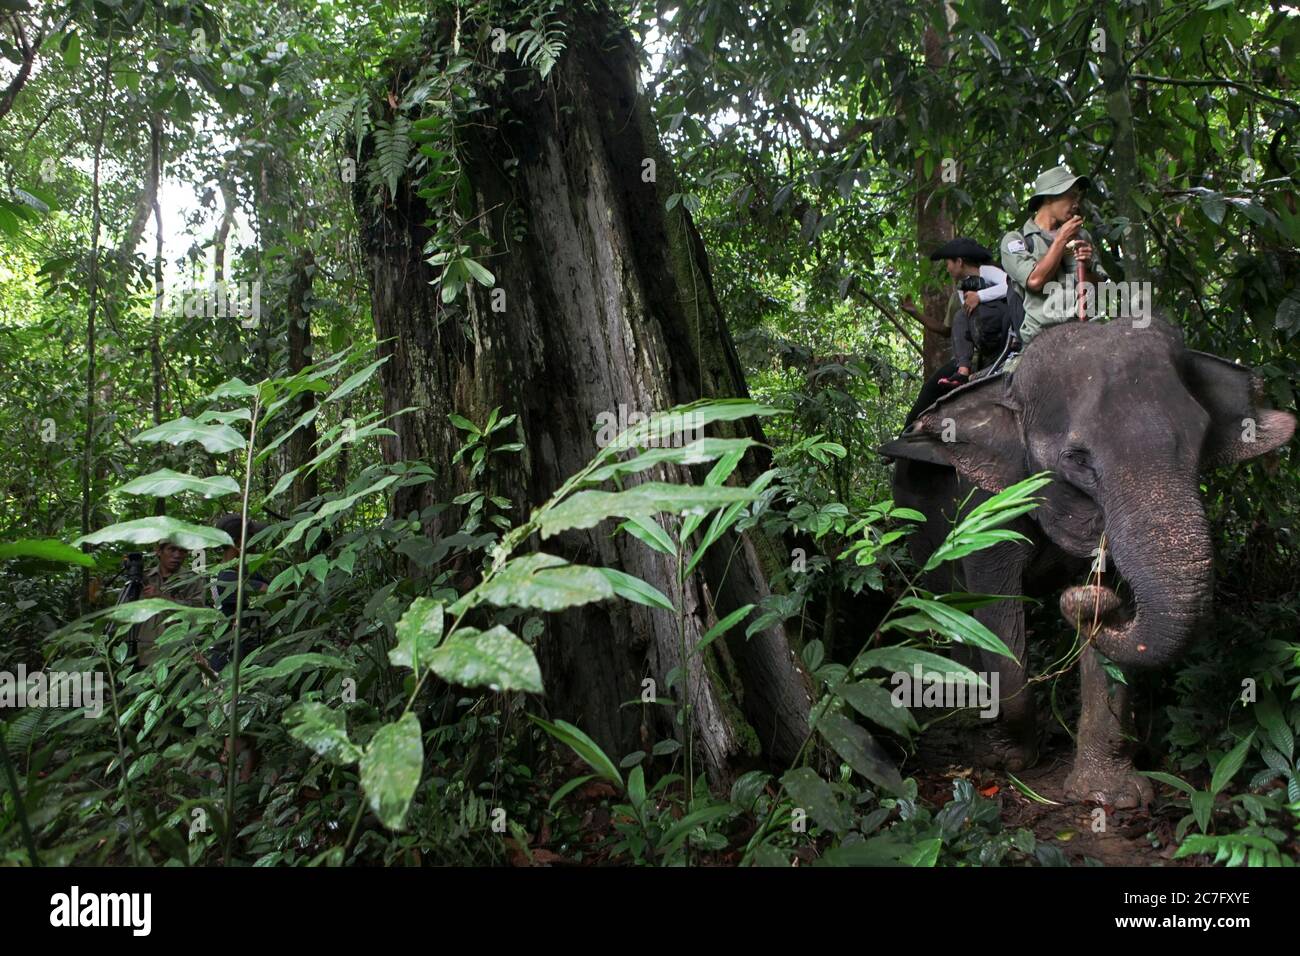 A park ranger riding an elephant with a visitor, in a simulation of forest patrol and elephant trek tour in Tangkahan, North Sumatra, Indonesia. Stock Photo